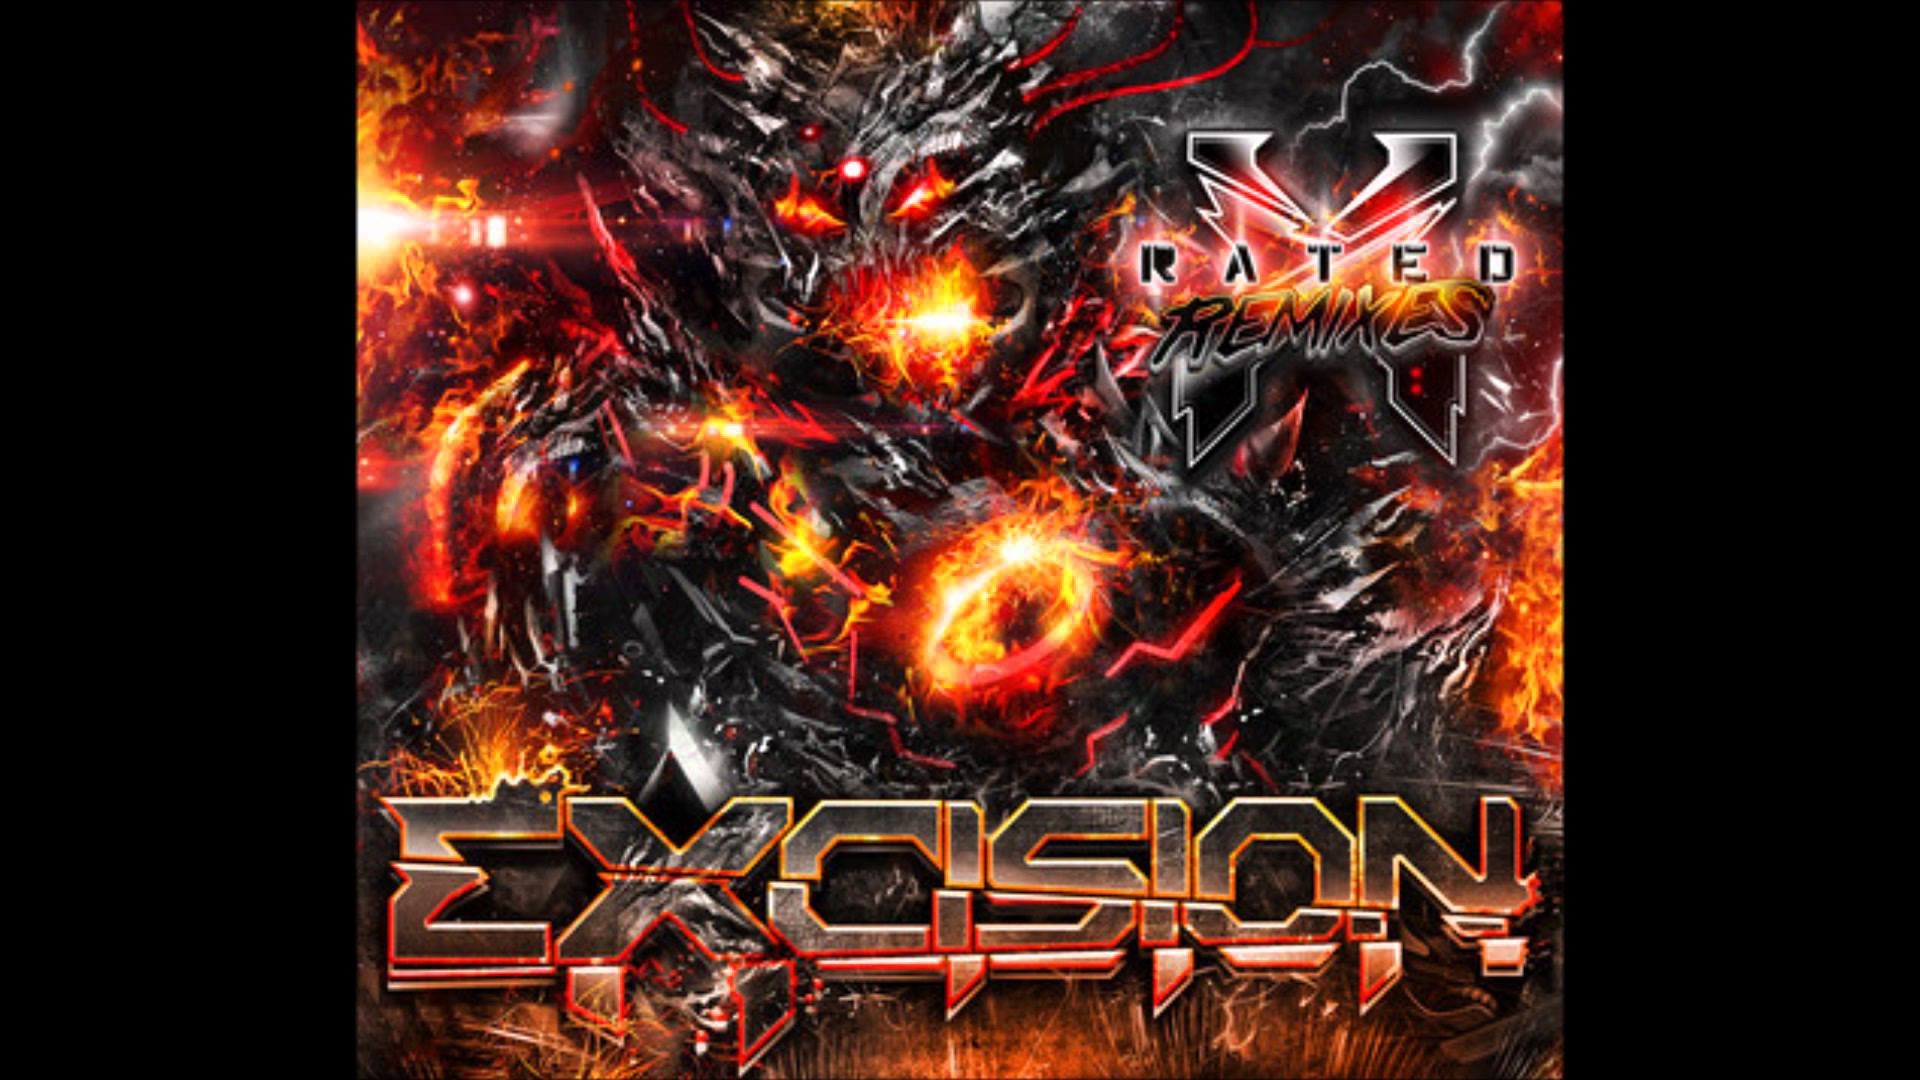 excision wallpaper,text,poster,font,graphic design,games